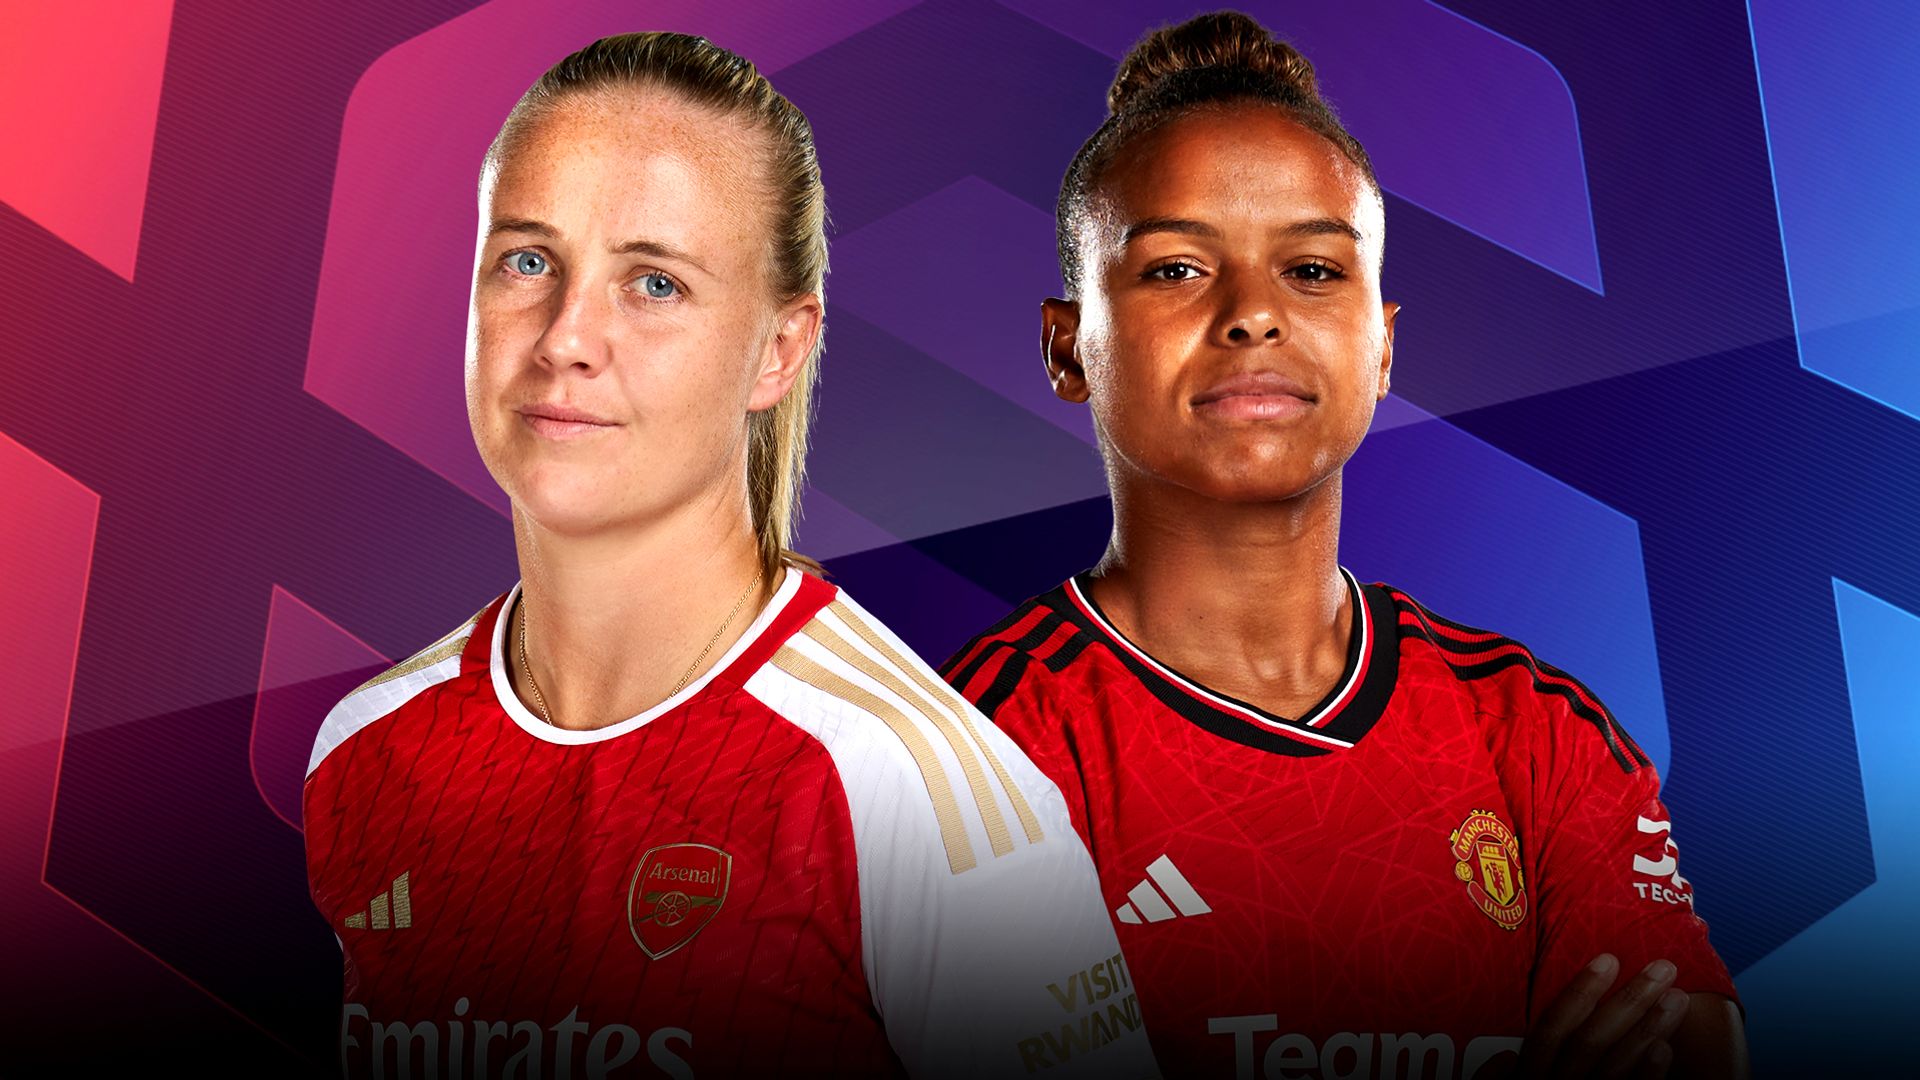 WSL: Arsenal sell out Emirates for Man Utd visit, live on Sky